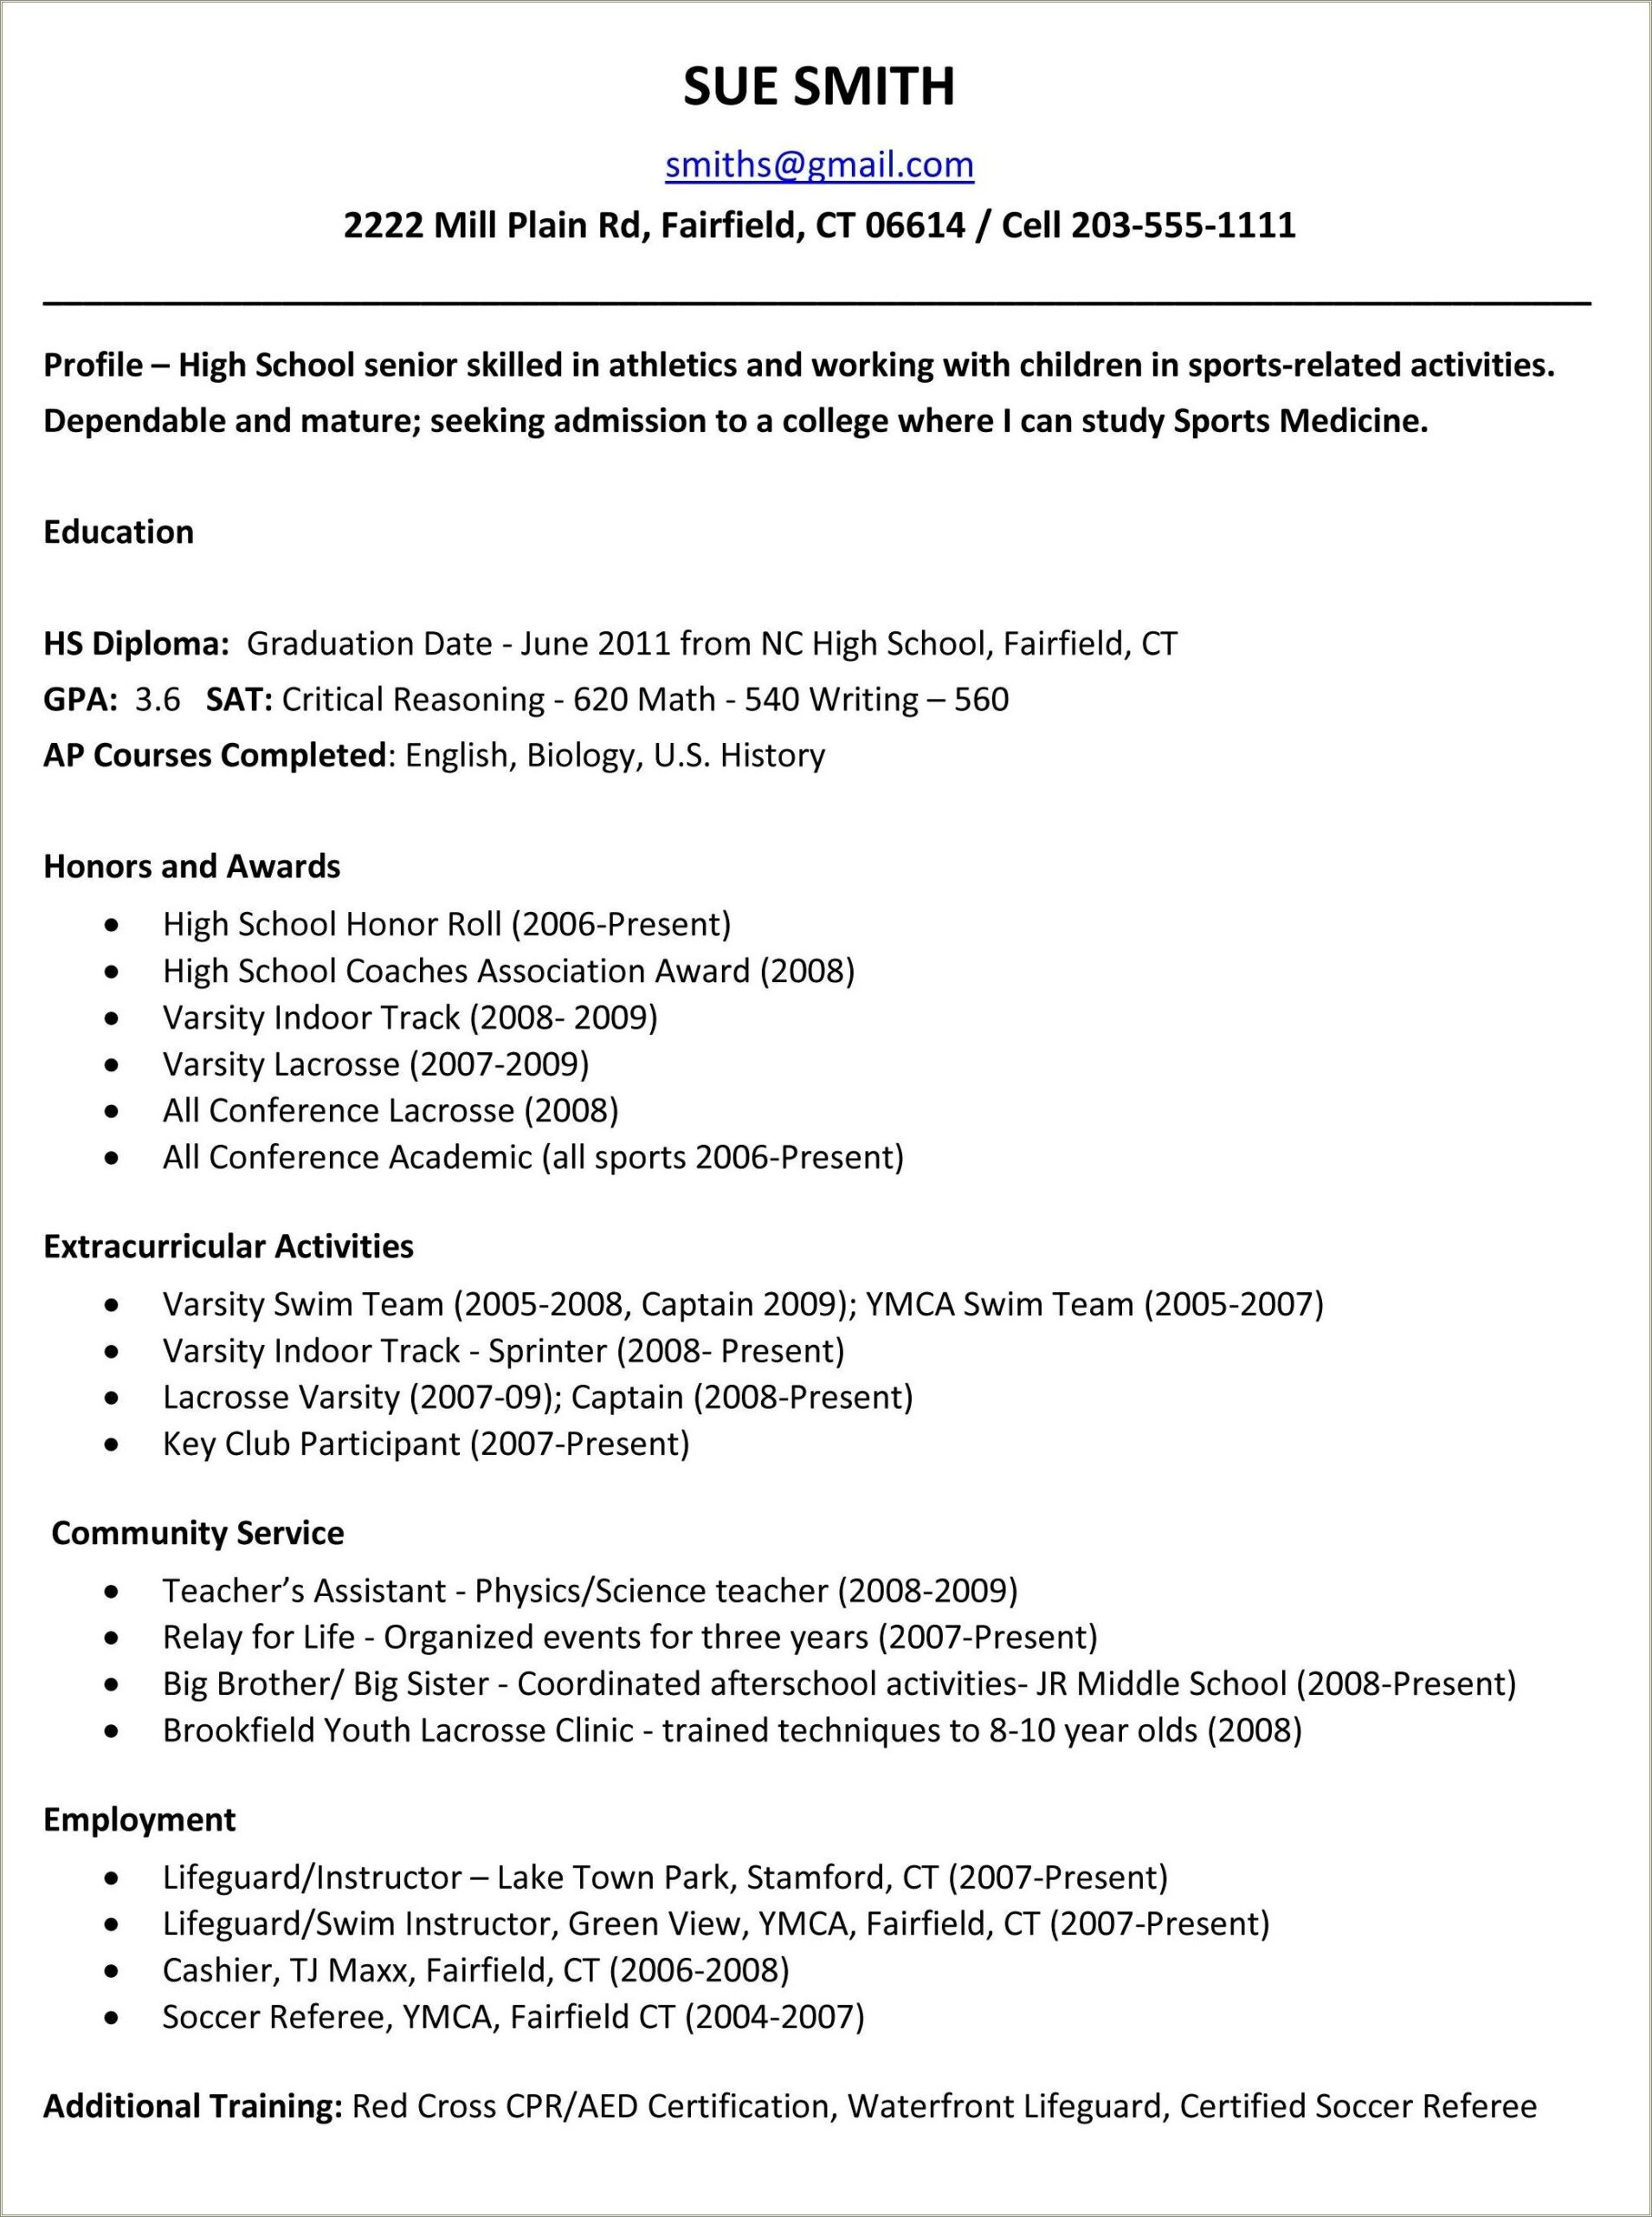 Sample Resume From A High School Student